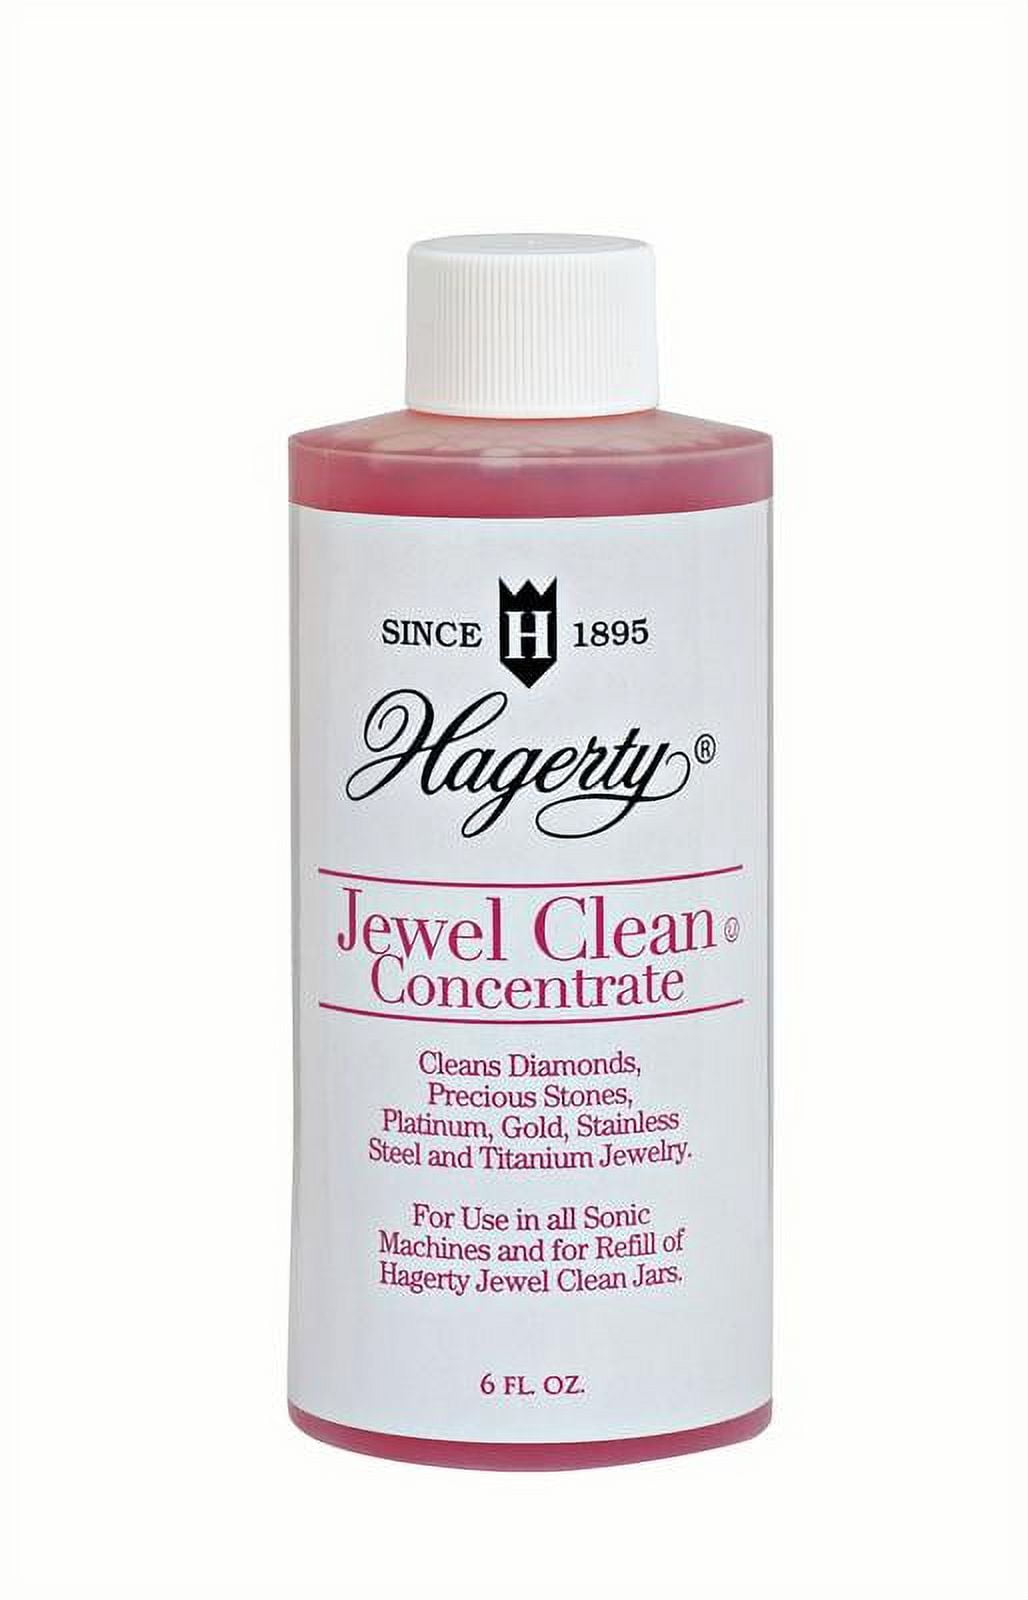 Hagerty JEWEL Clean Jewelry Cleaner 7oz #16007 for sale online